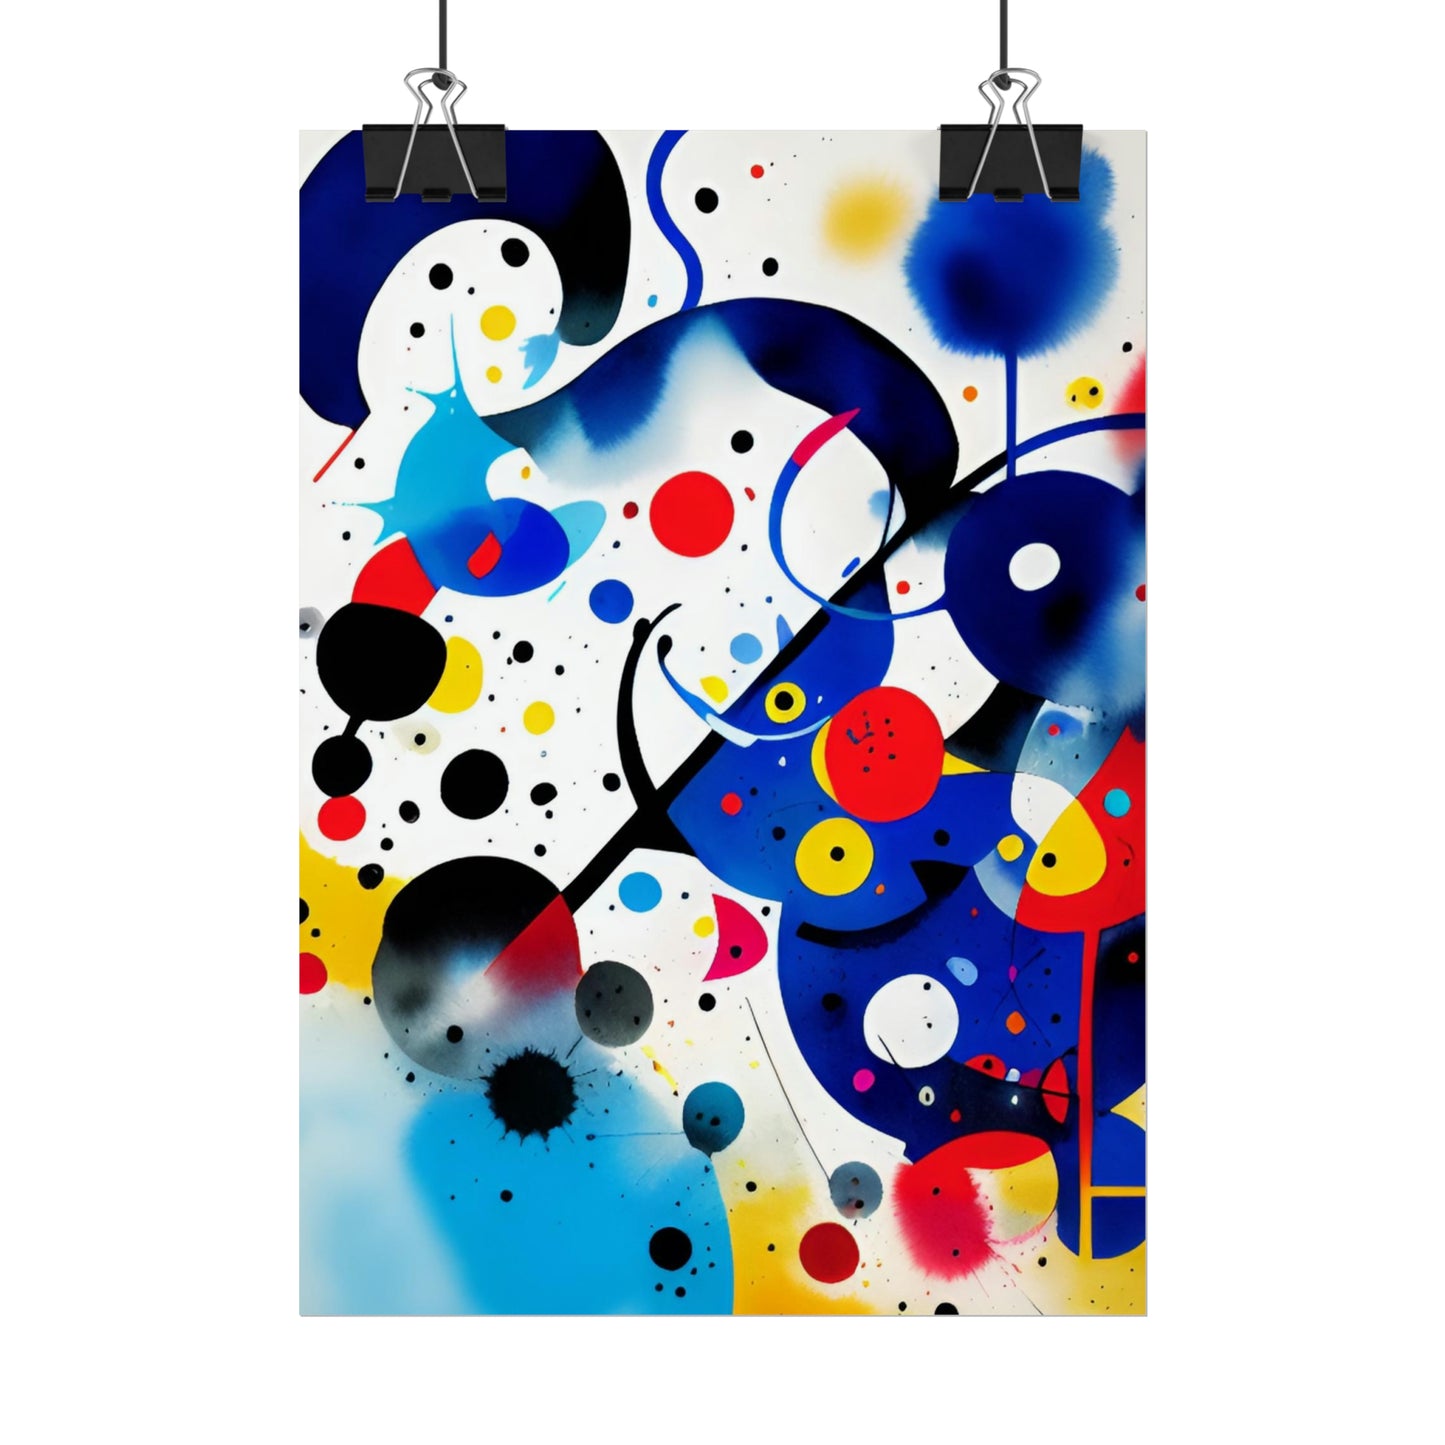 Rolled Poster, Inspired by Miro